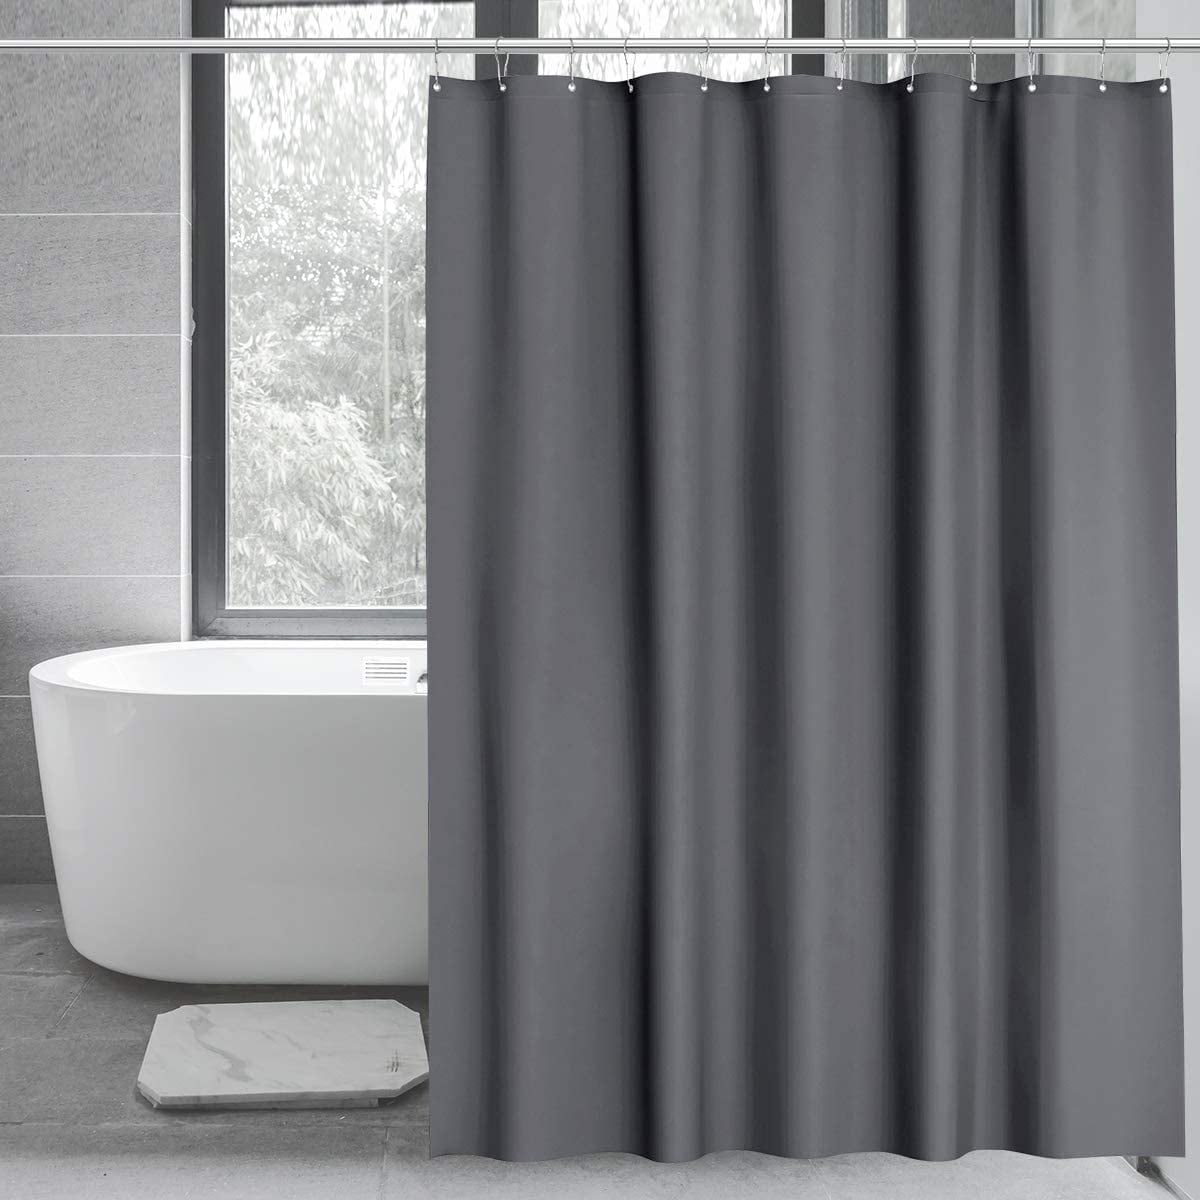 Peva Shower Curtain Liner With Magnets, What Are Plastic Shower Curtains Made Of